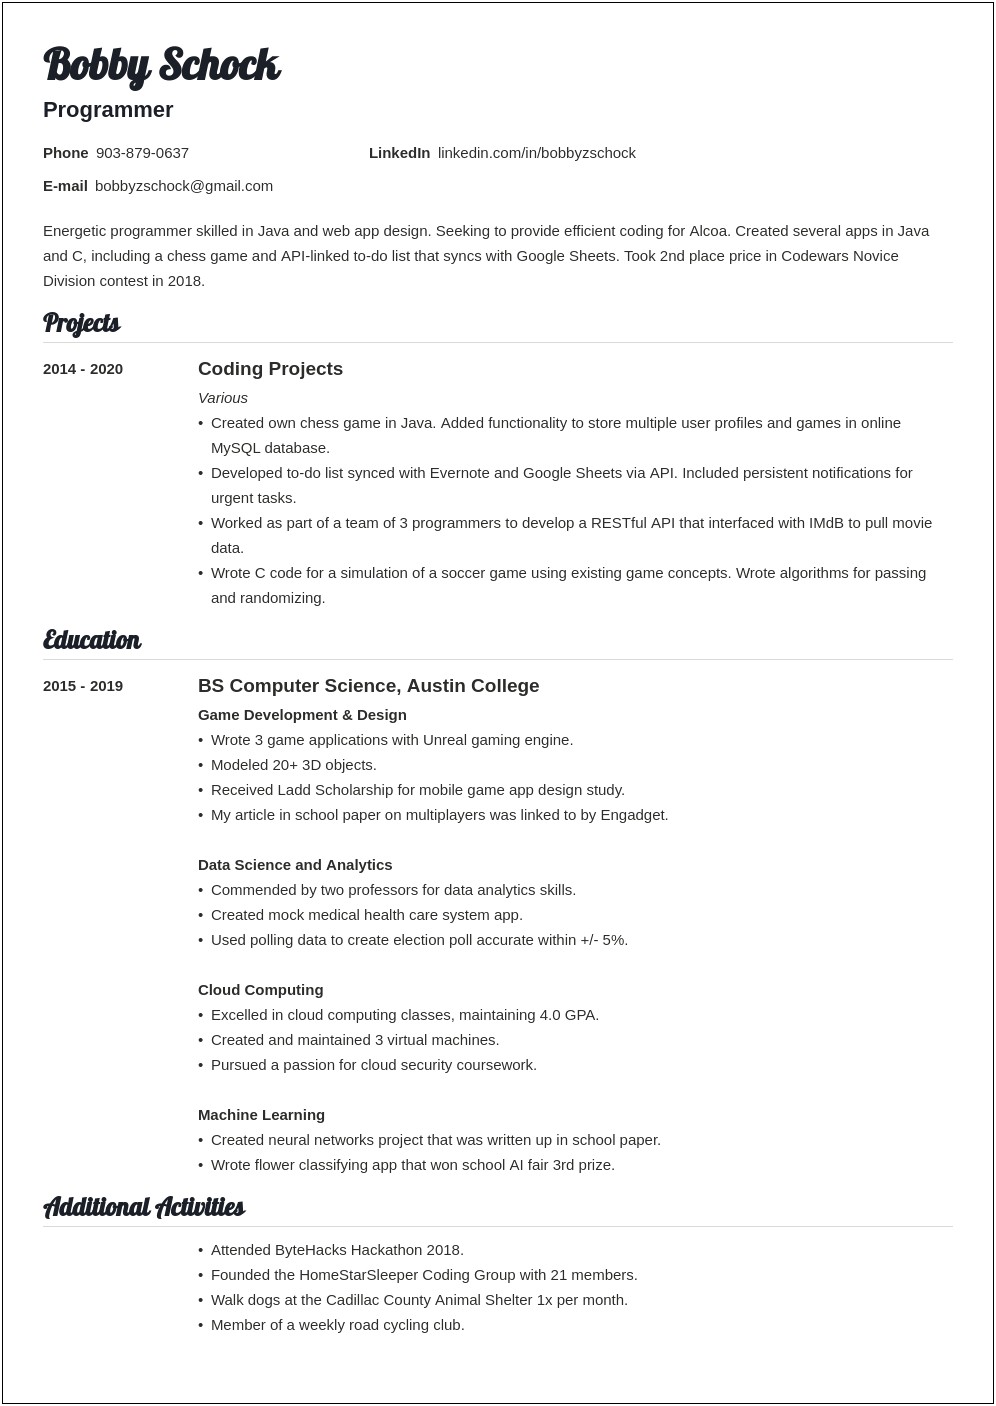 Resume Template For People With No Expeirence